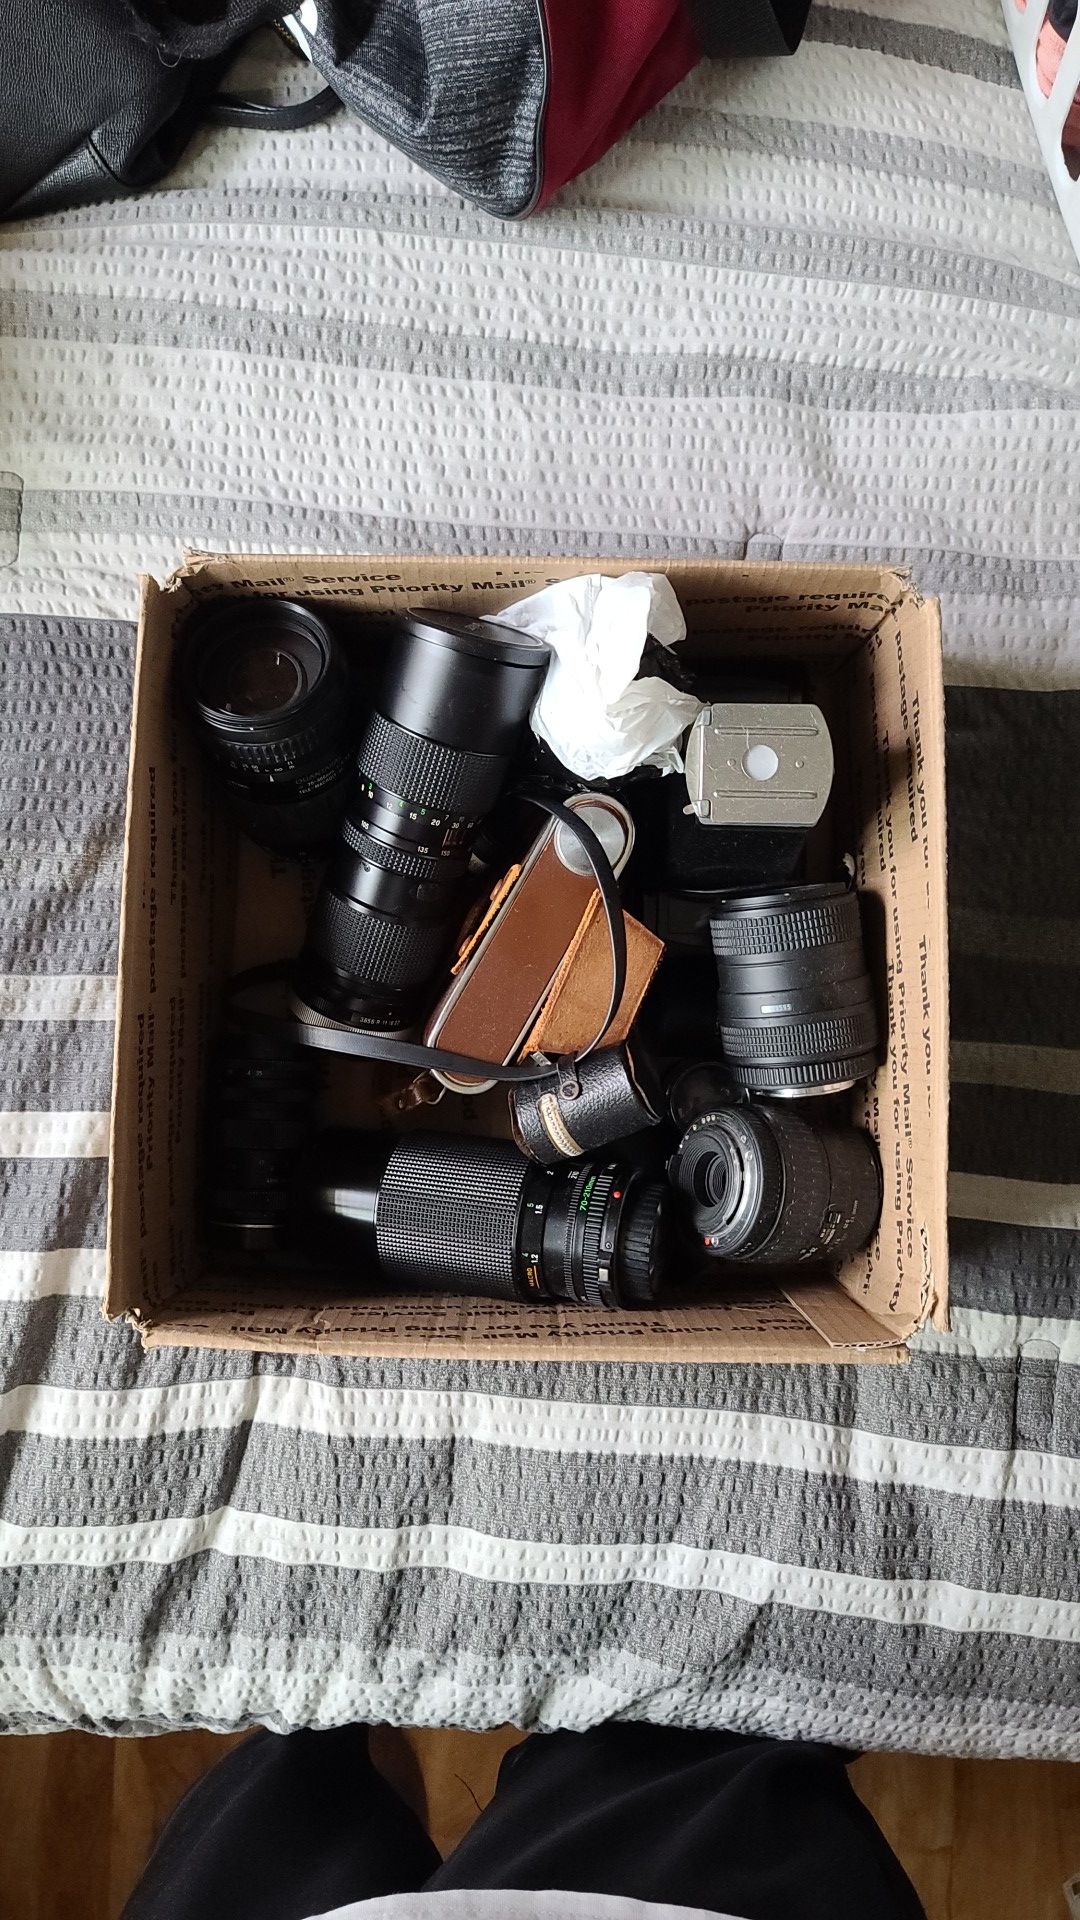 Box full of random SLR camera lenses. Included is a Ricoh 35 with leather case